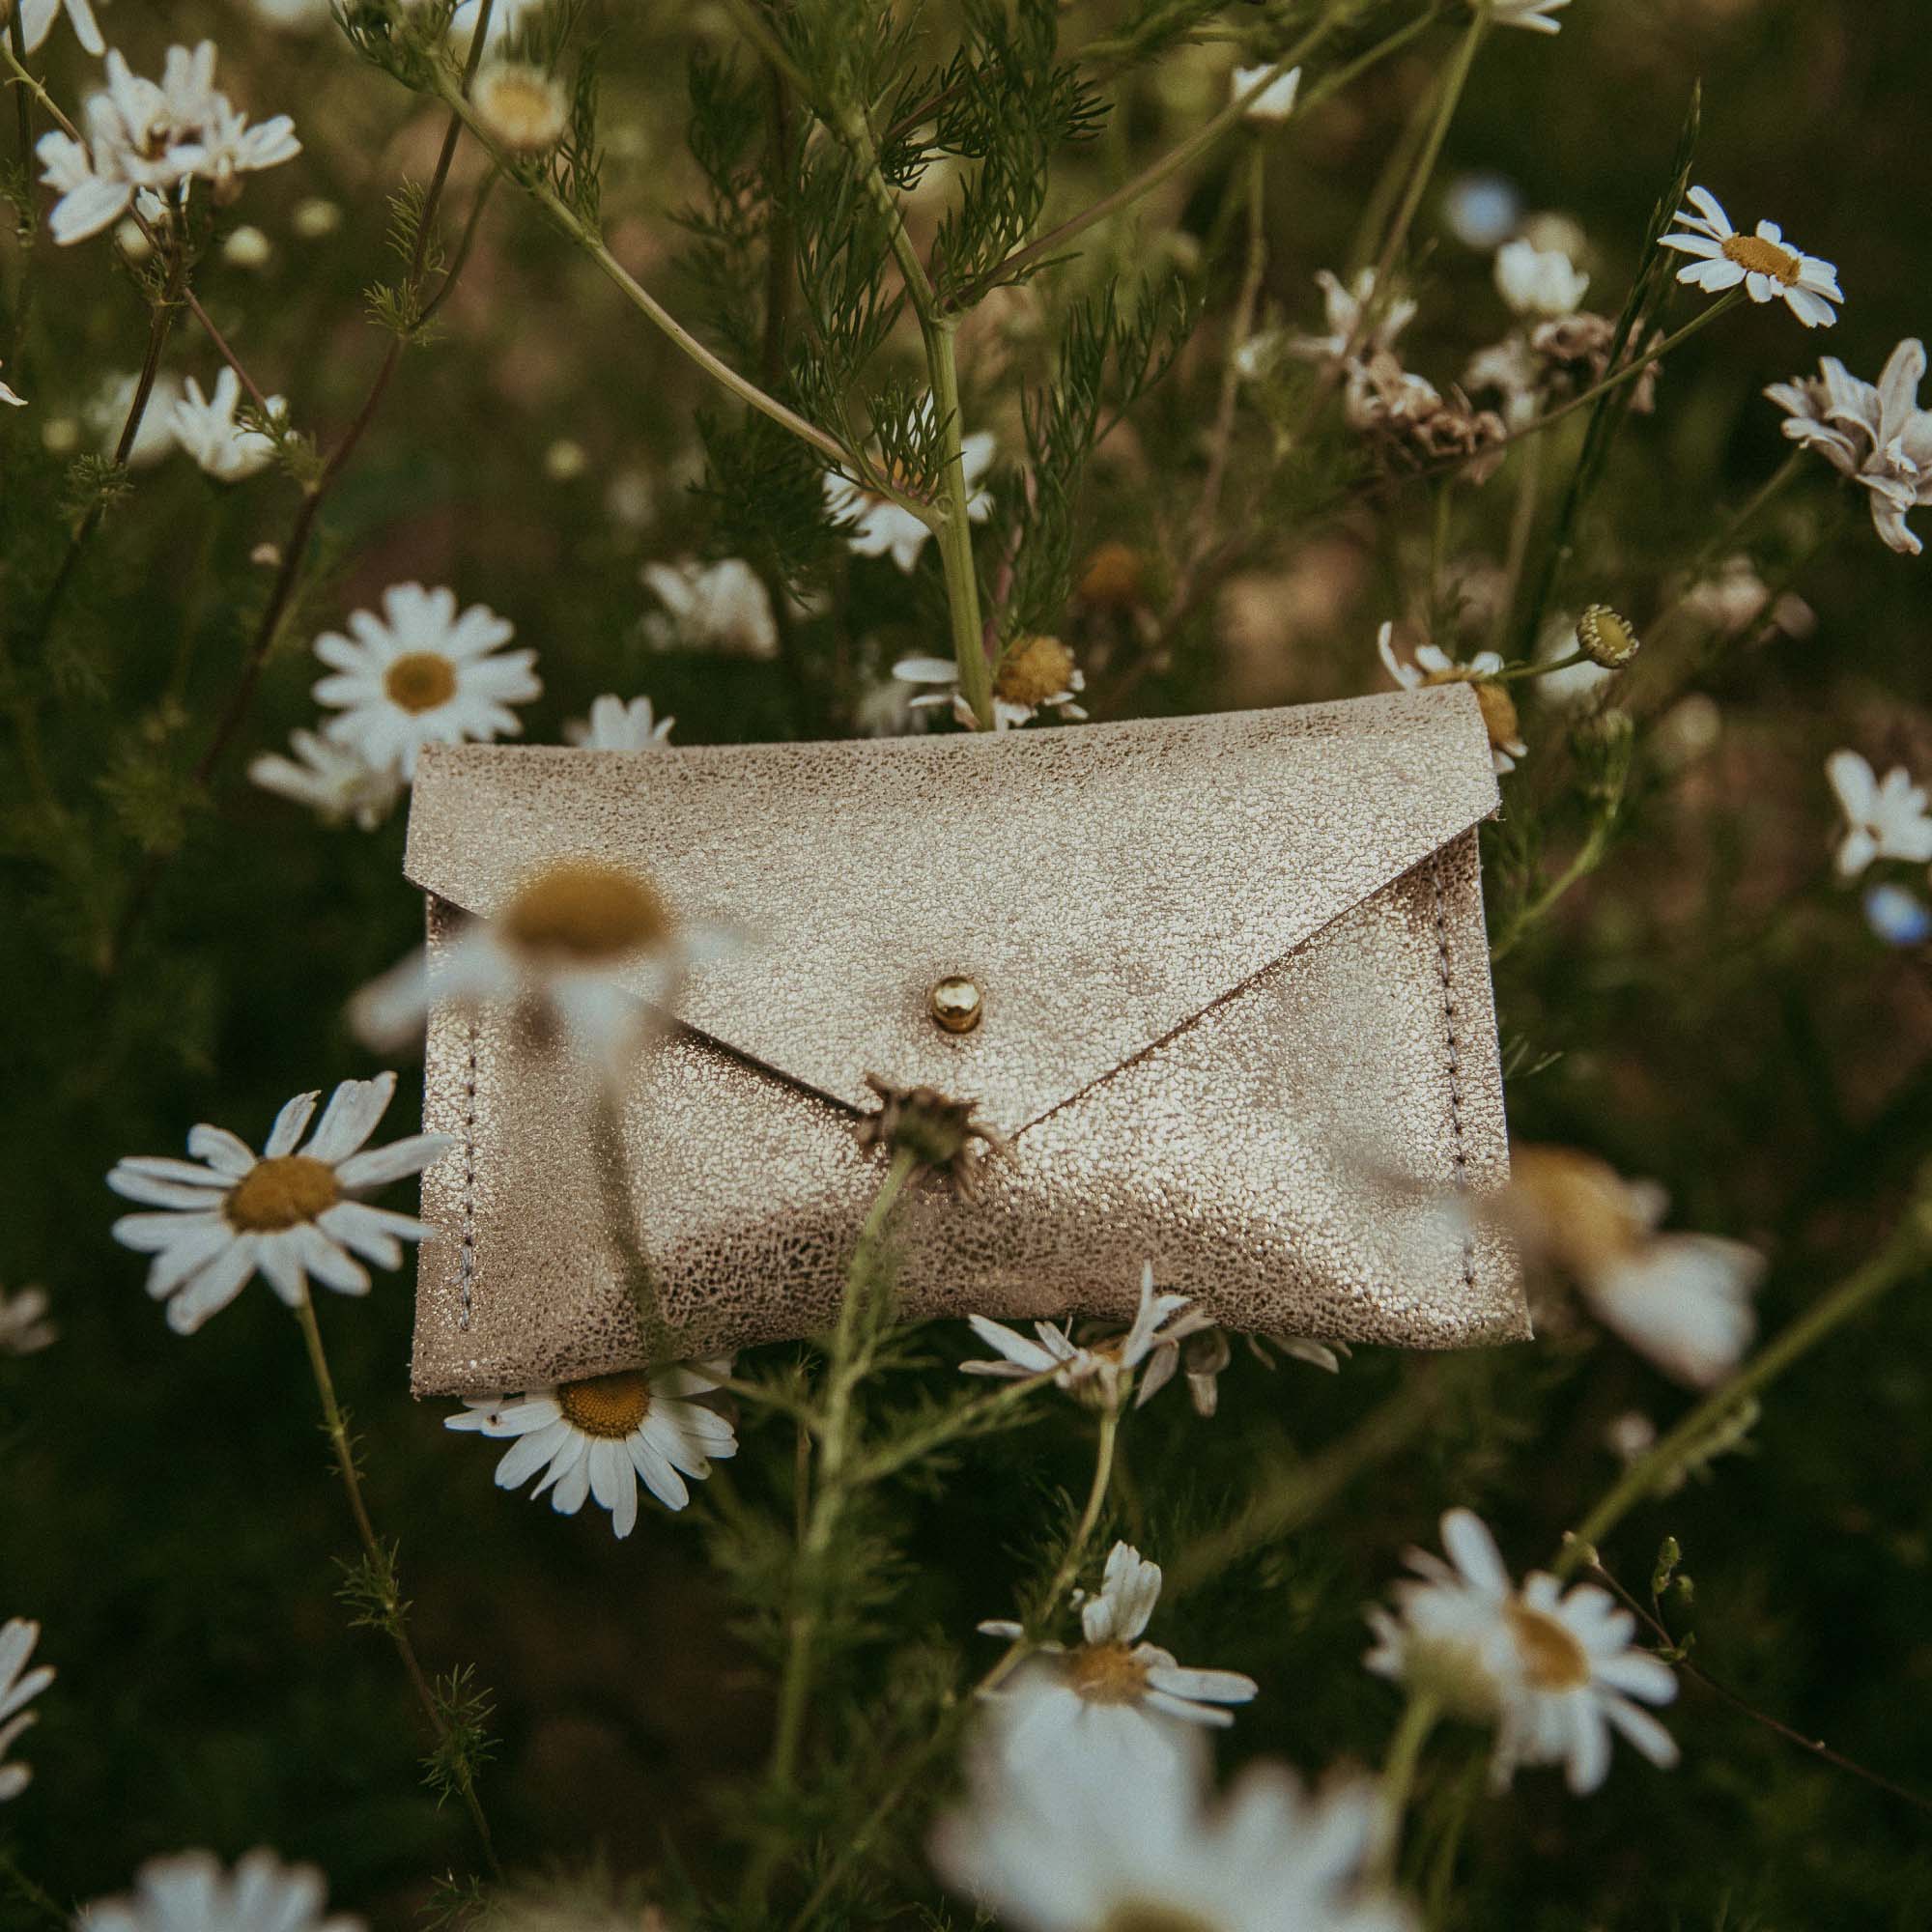 Gold Leather Card Purse sat in field of daisies.